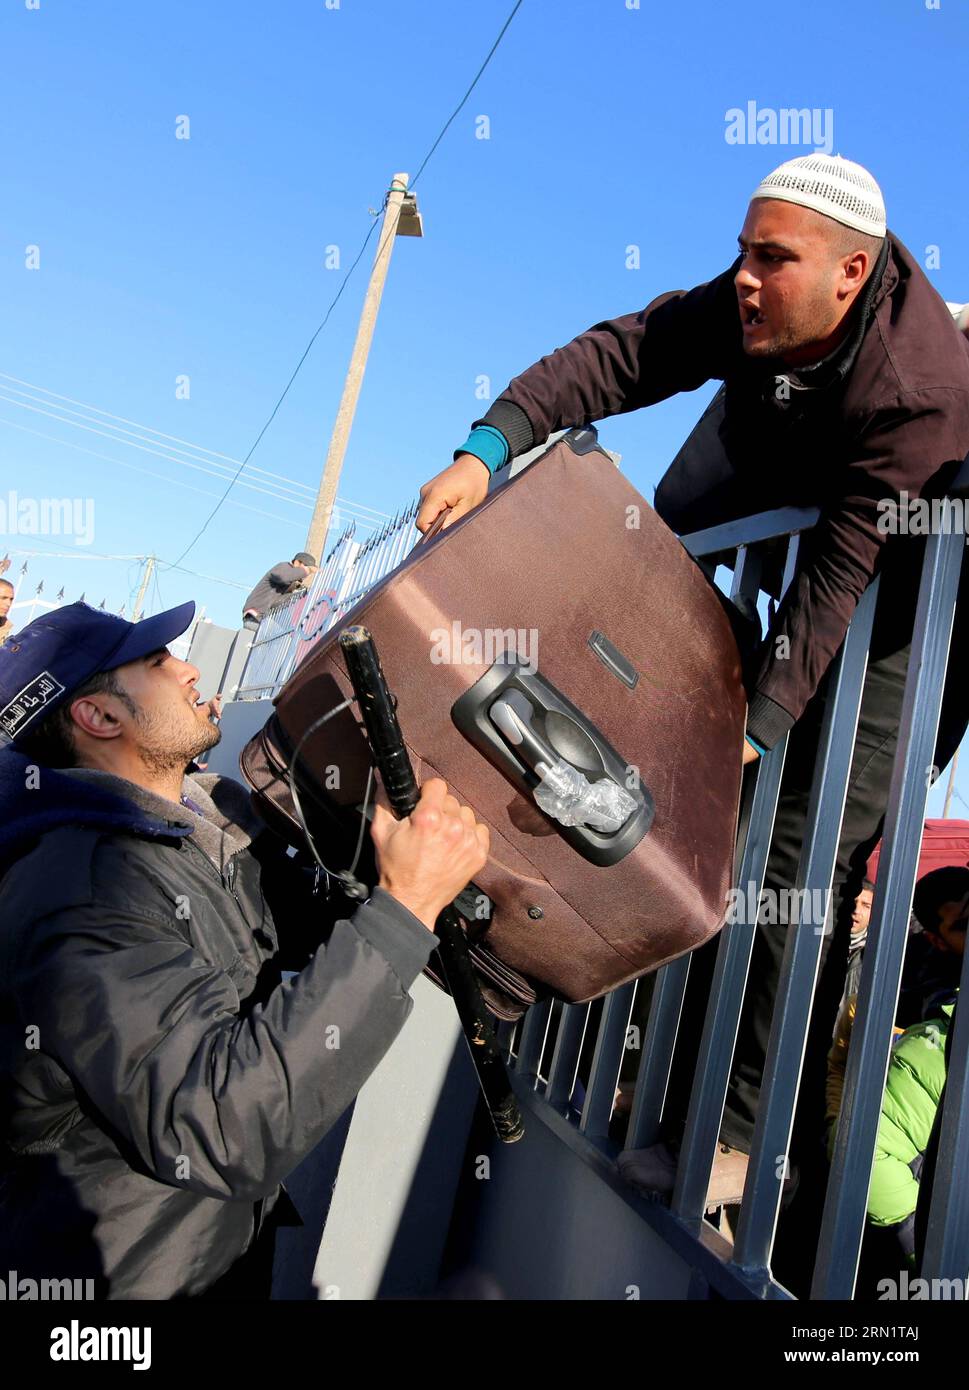 (150120) -- GAZA, Jan. 20, 2015 -- A Palestinian, hoping to cross into Egypt, climb a wall and lower his suitcase at the Rafah crossing between Egypt and the southern Gaza Strip, Jan. 20, 2015. Egyptian authorities reopened Rafah crossing on Tuesday for three days, officials said. Egypt shut the crossing over violence with Islamist militants in Sinai region last October. Since then, it opened the crossing partially to allow thousands of Palestinians to travel in and out of Gaza Strip.Khaled Omar) MIDEAST-GAZA-RAFAH-CROSSING EmadxDrimly PUBLICATIONxNOTxINxCHN   Gaza Jan 20 2015 a PALESTINIAN ho Stock Photo